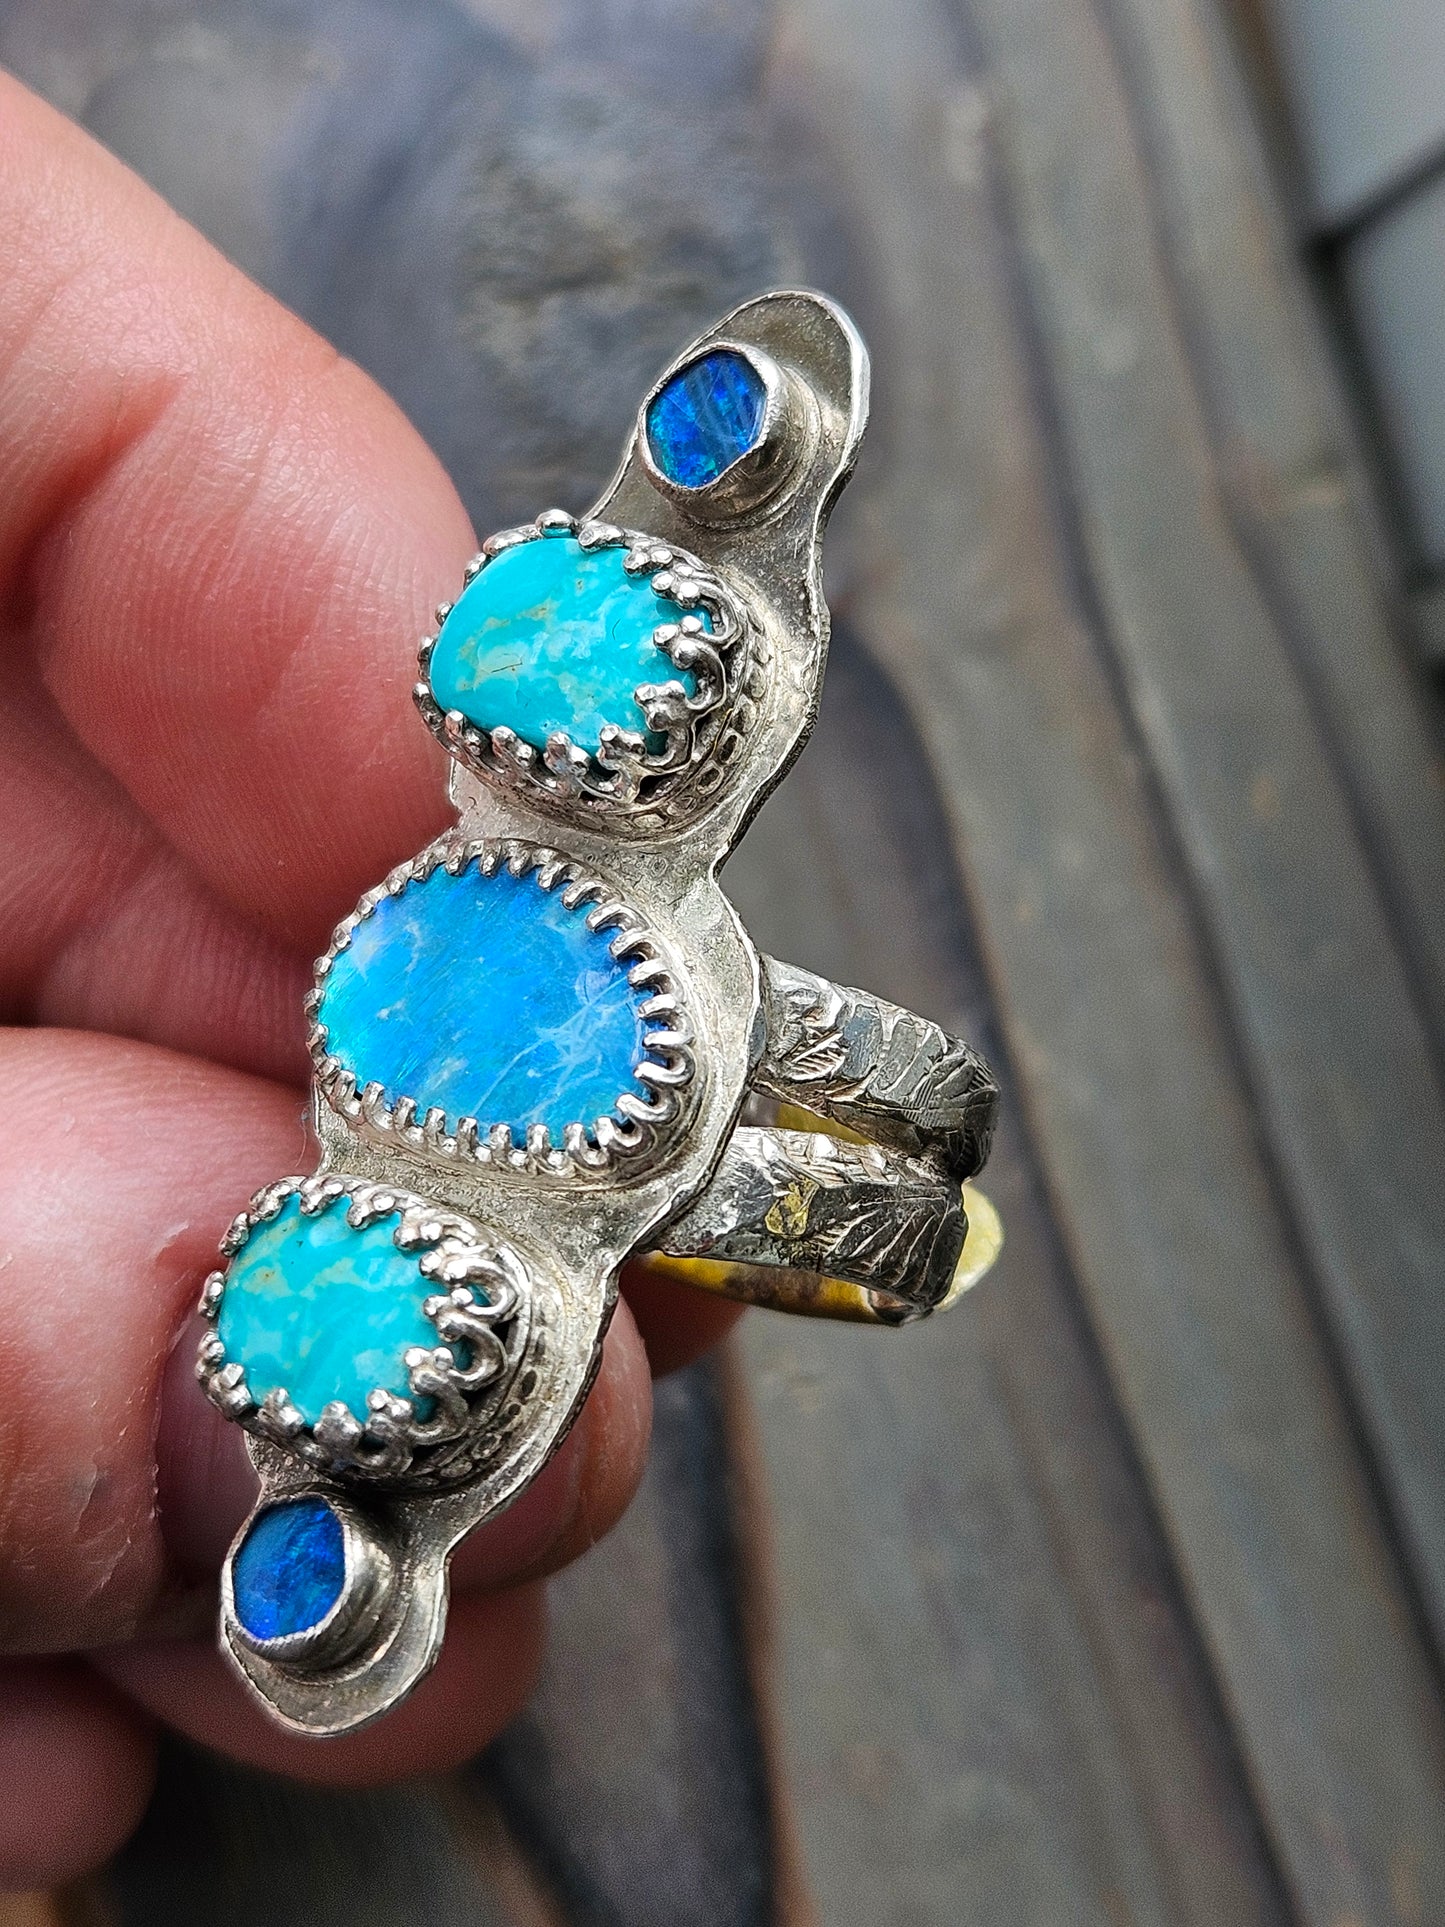 Australian Opal and Turquoise statement ring, size 8